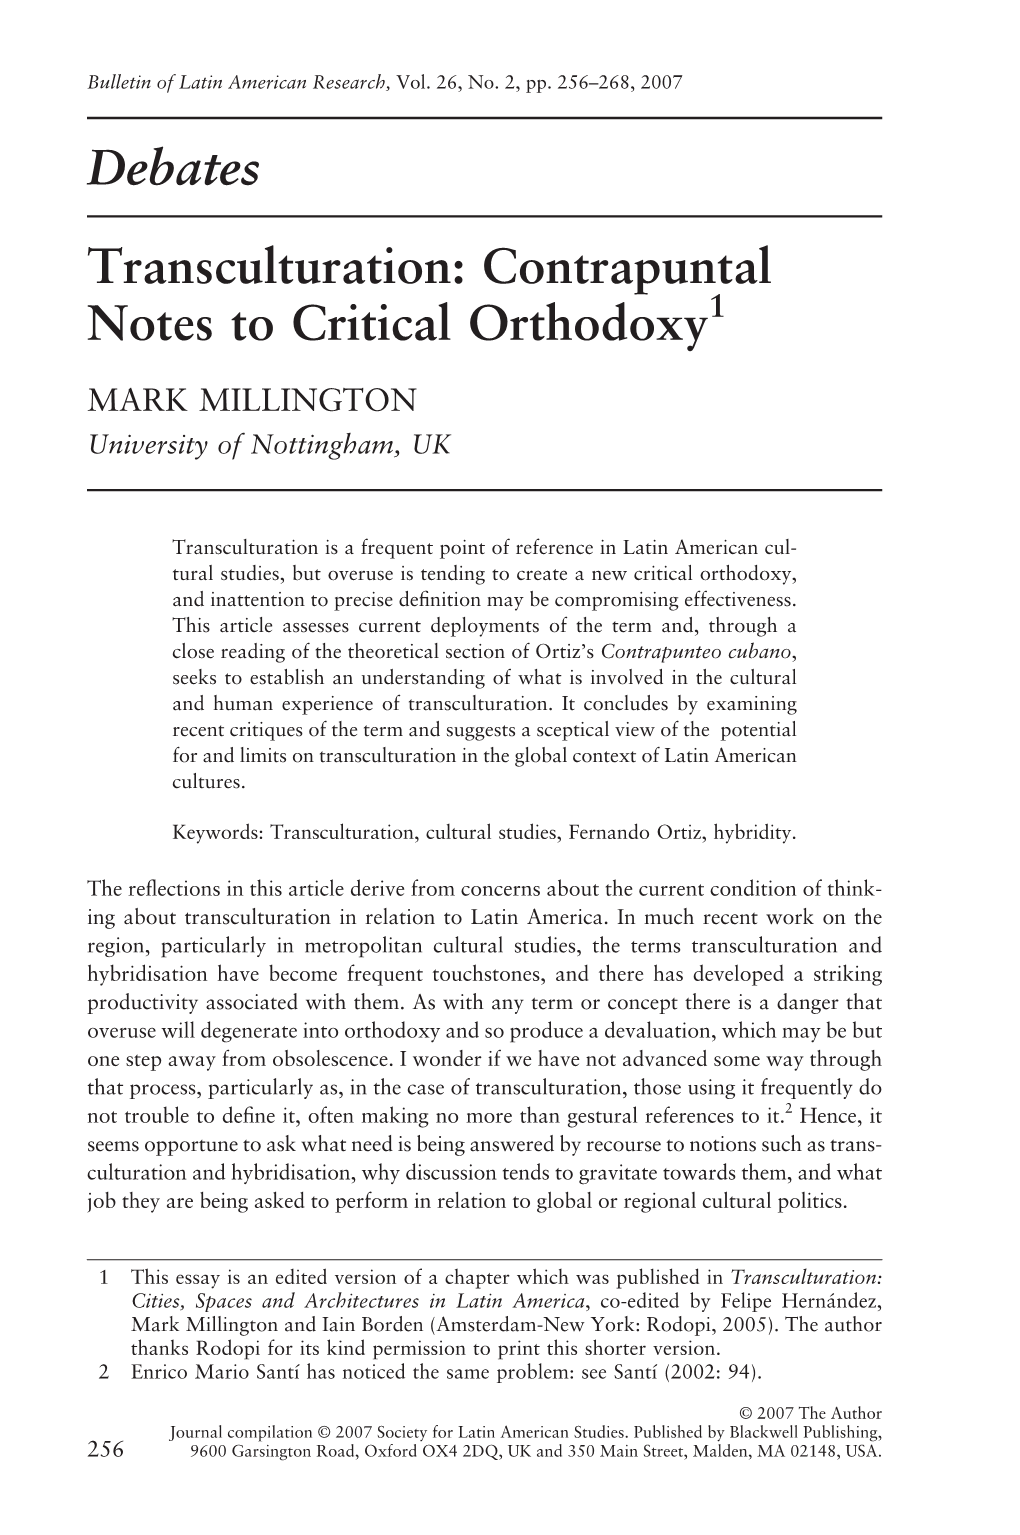 Debates Transculturation: Contrapuntal Notes to Critical Orthodoxy 1